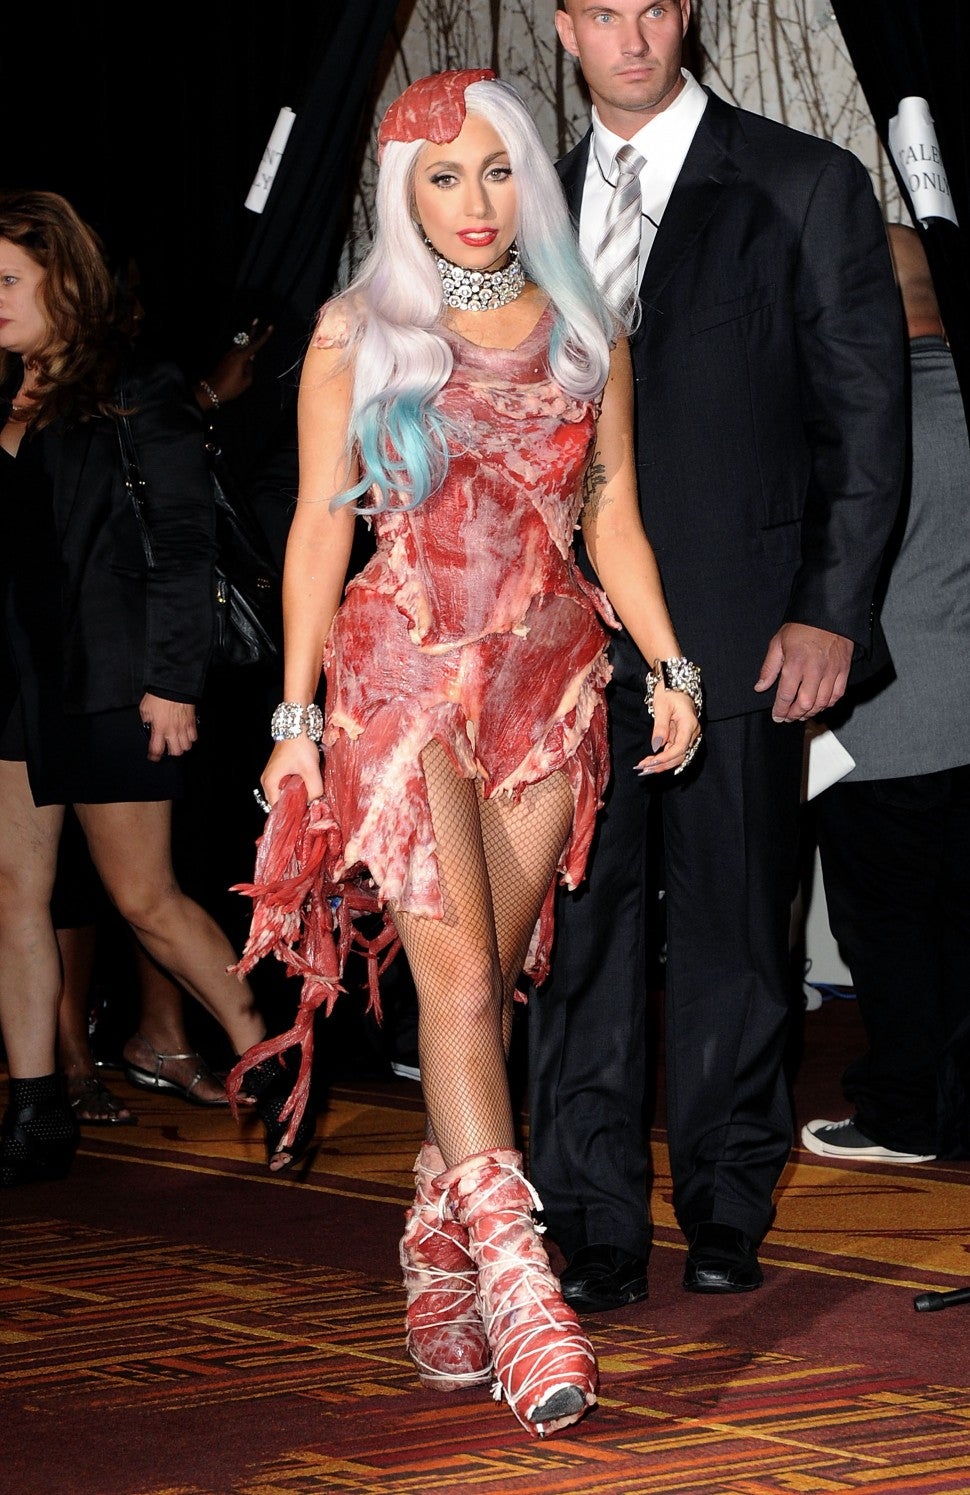 Lady Gaga in the meat dress